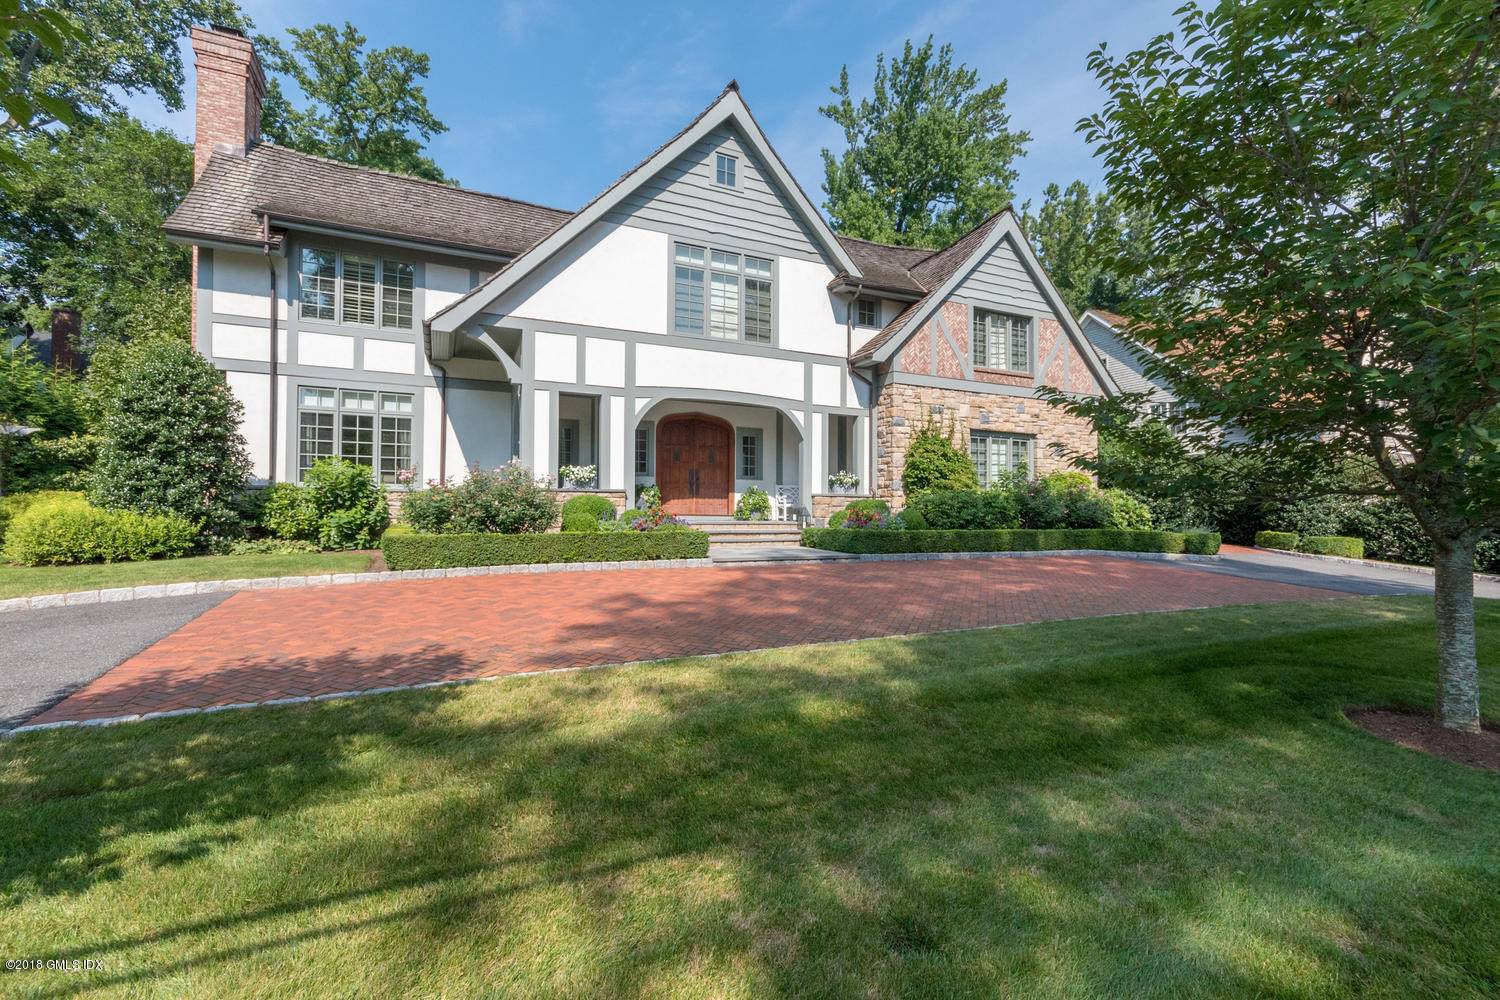 Milbrook Association close to Greenwich Ave train Custom exquisite home on private gorgeous level property allows for amazing indoor outdoor living.